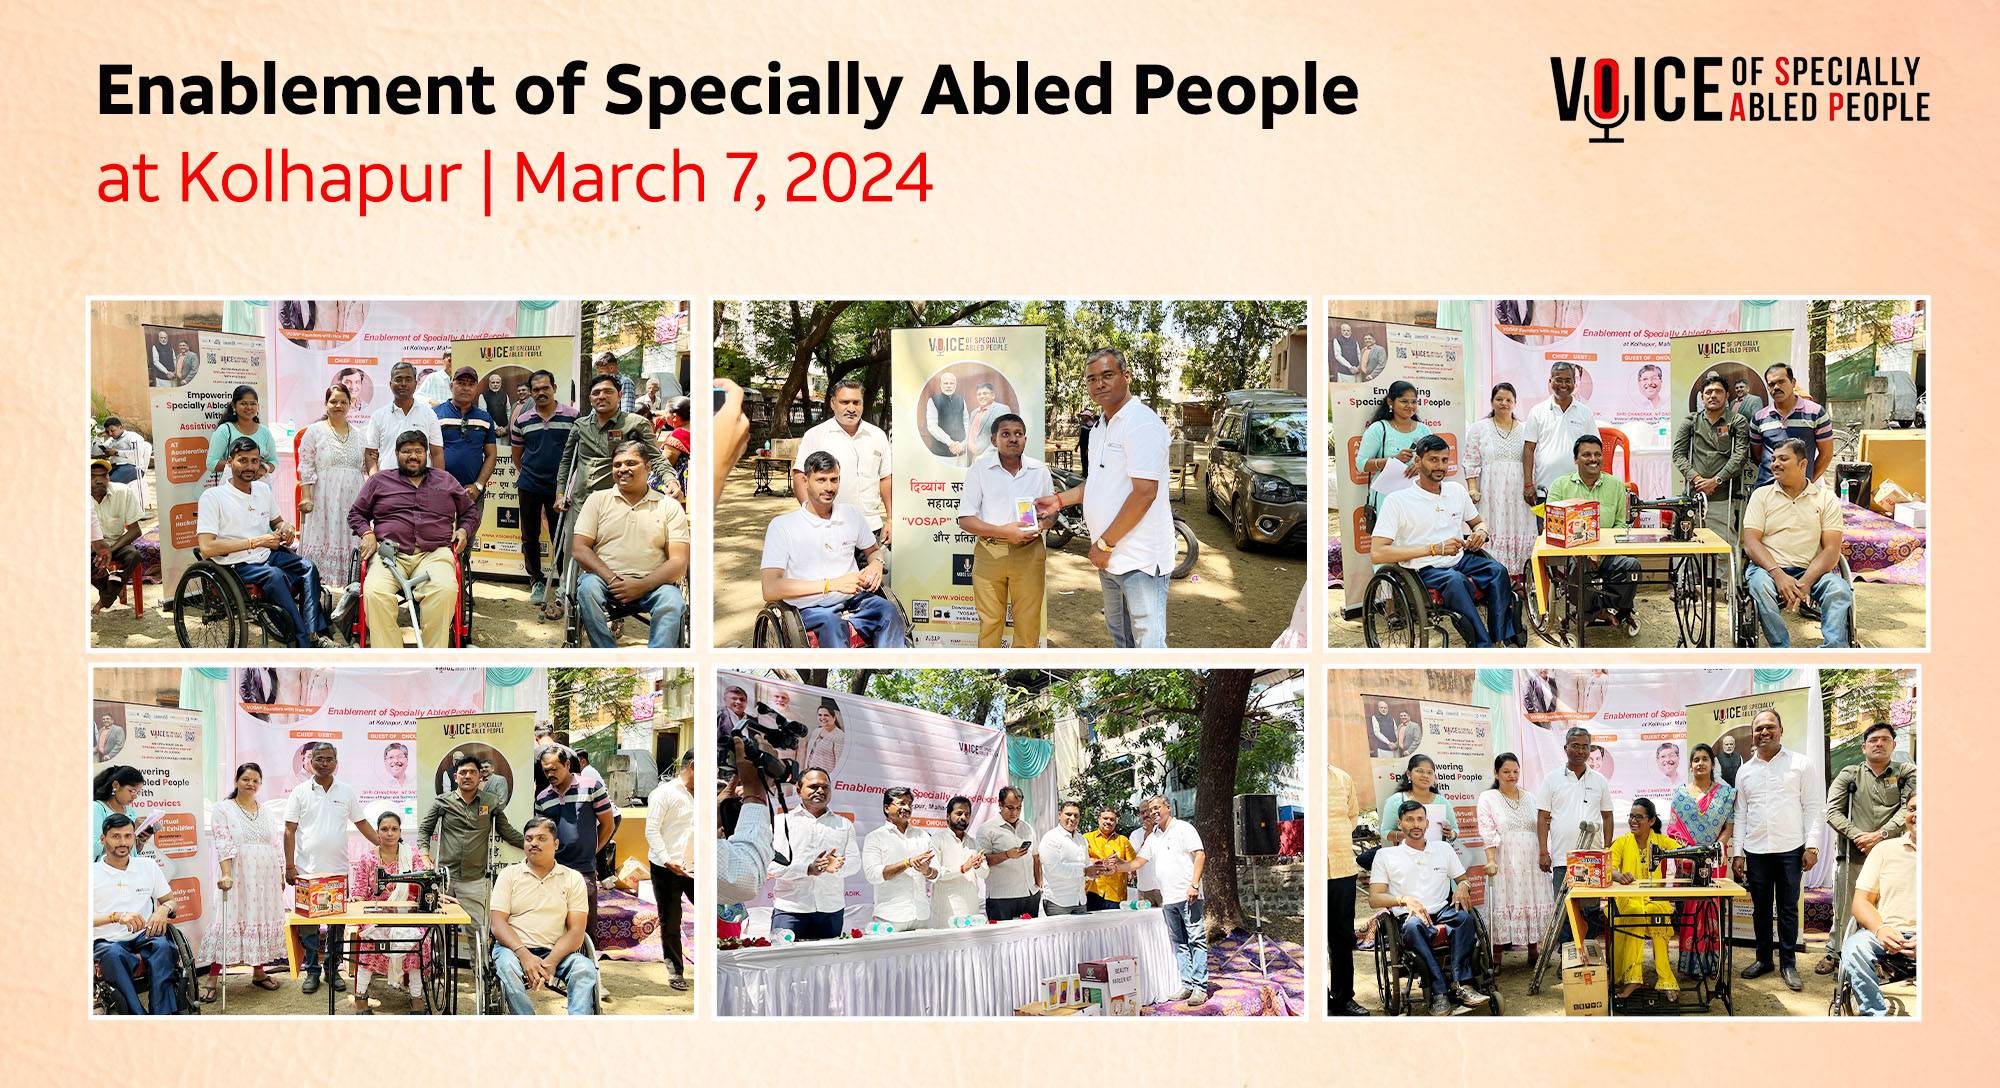 Enablement of Specially Abled People at Kolhapur  March 07, 2024